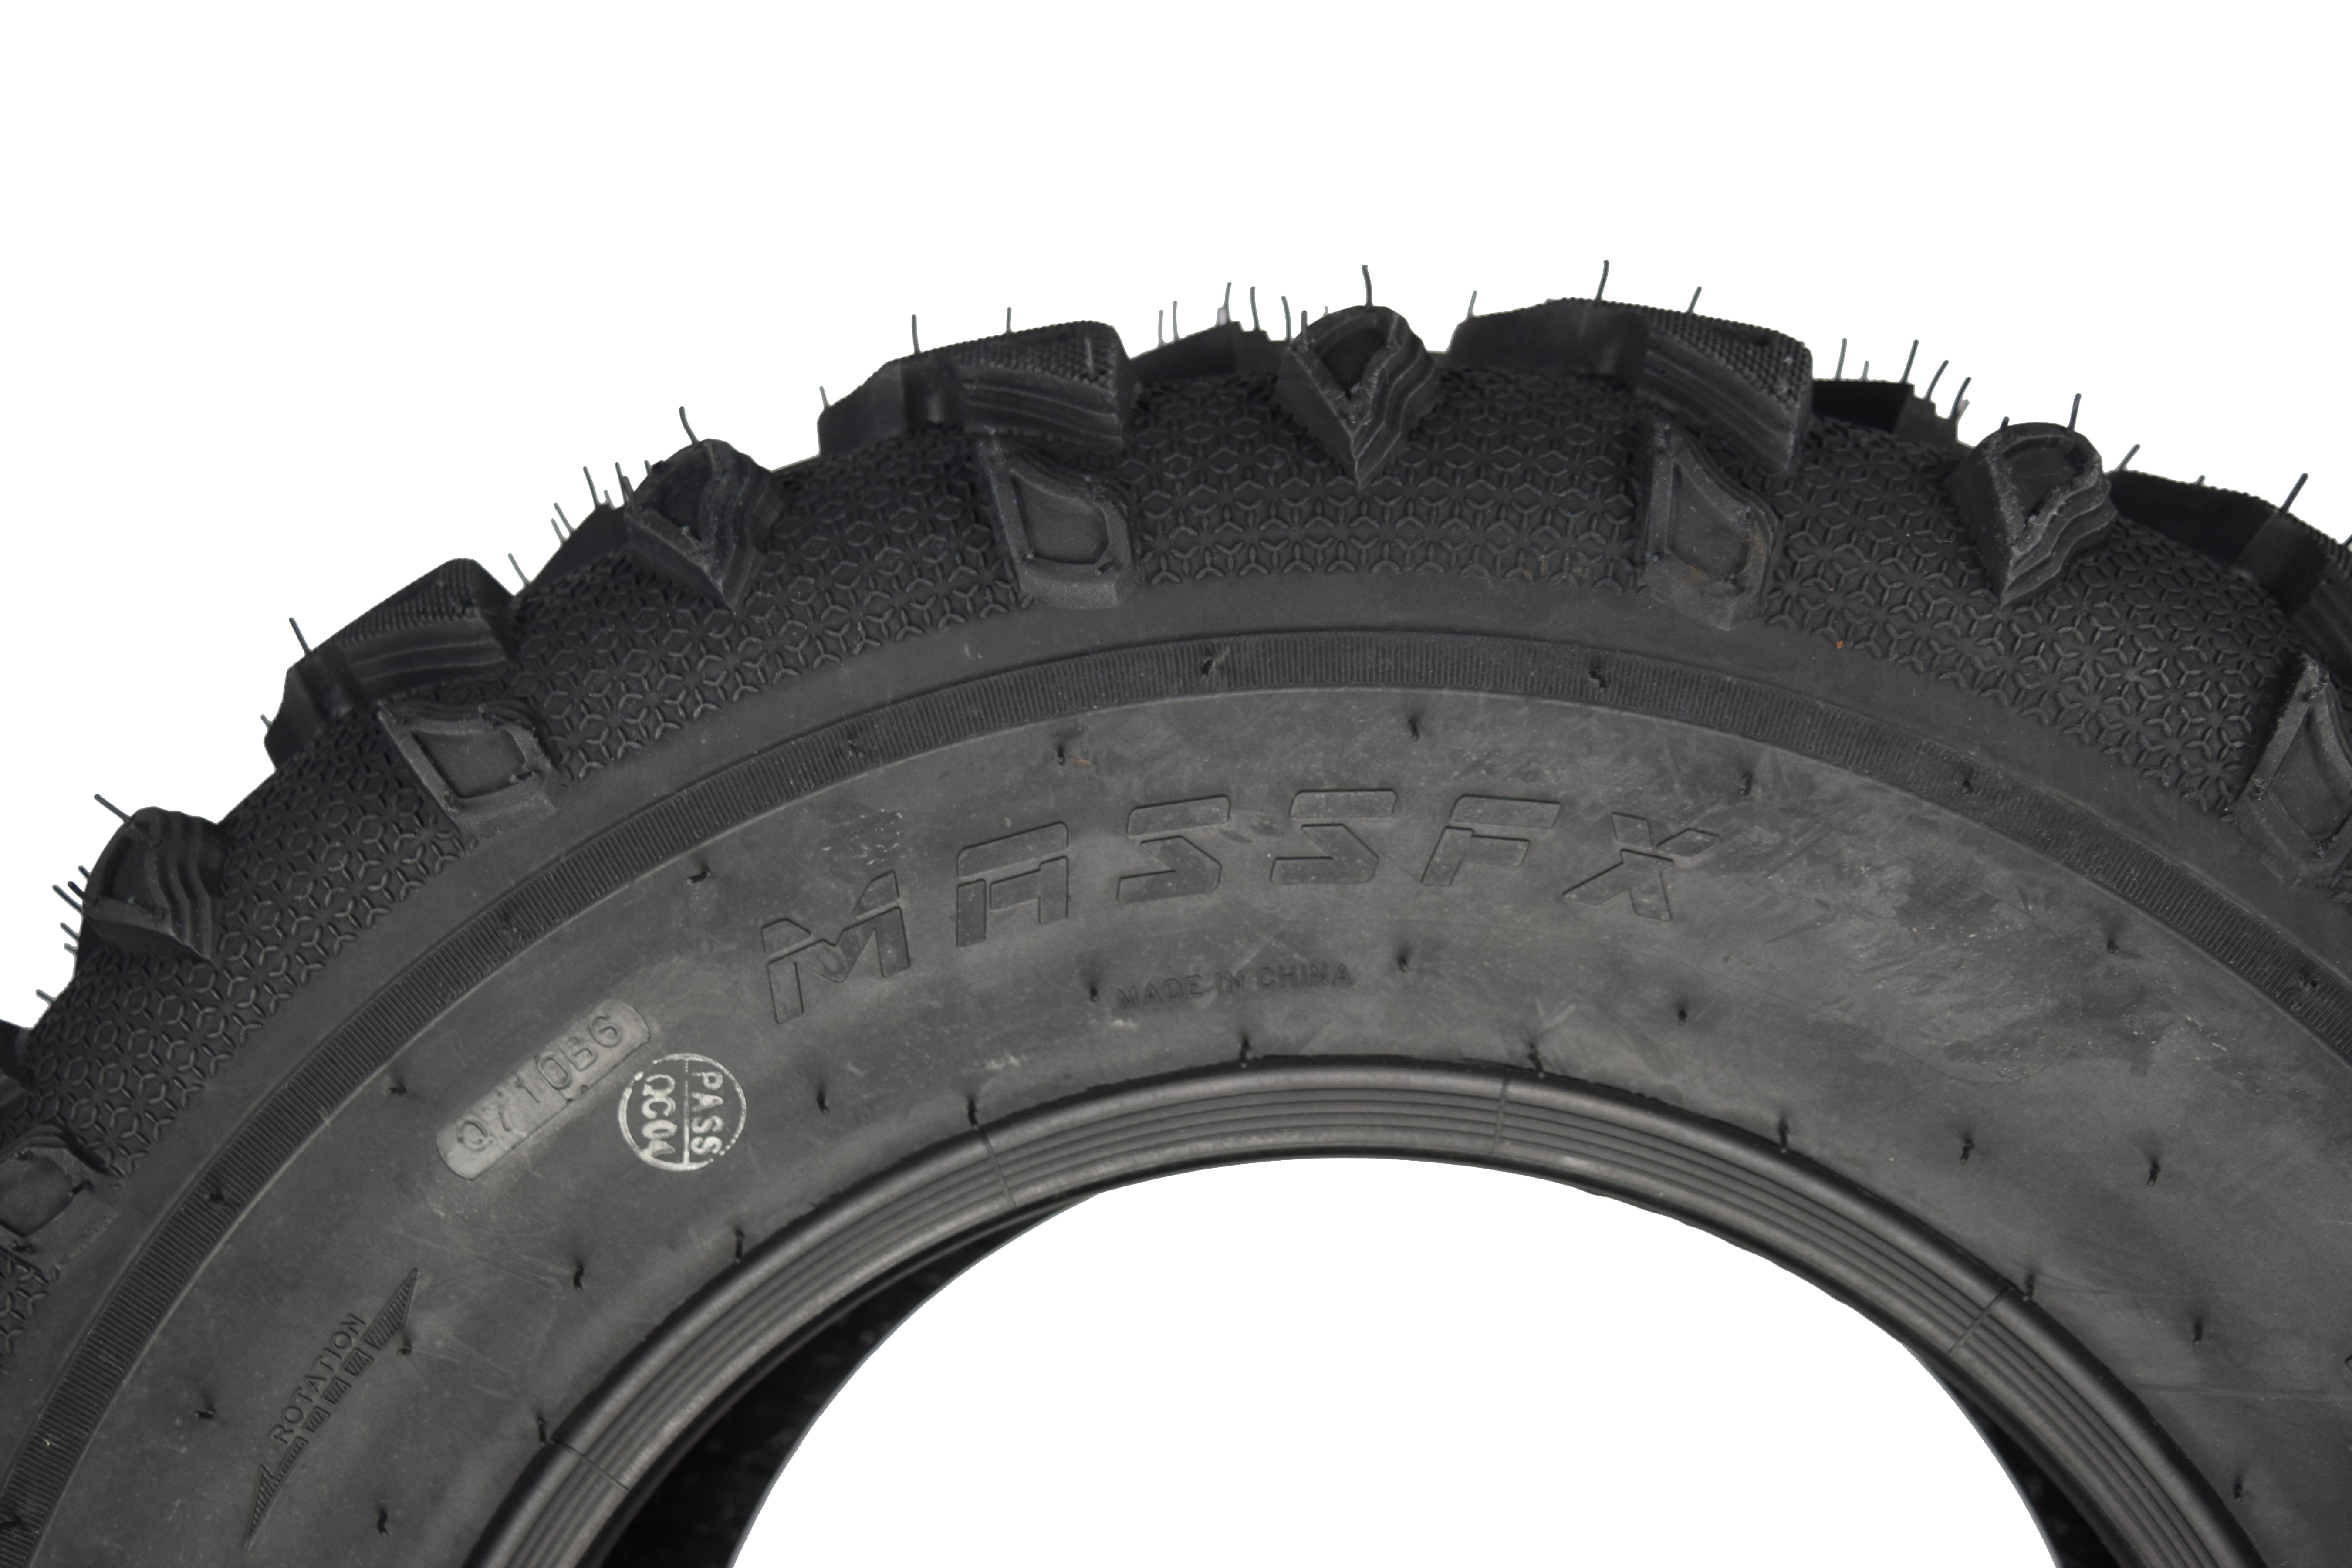 MASSFX Grinder 25x10-12 Rear ATV Tire 6 Ply for Soft/Hard Pack Ground